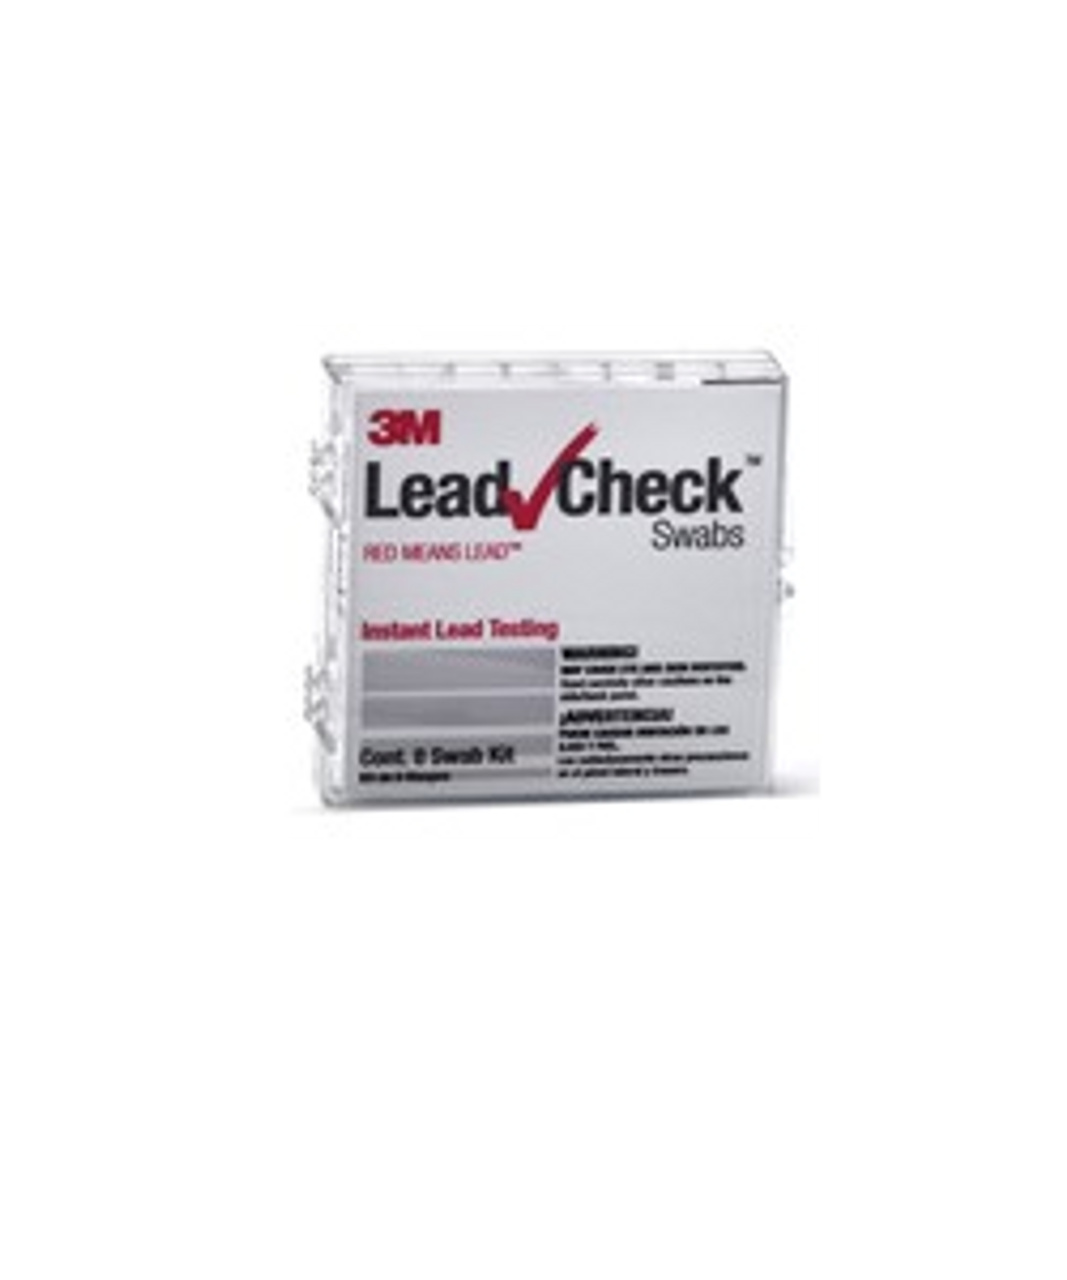 Purchase From LeadPaintEPAsupplies and be covered by Our ZERO Defect Guarentee Policy Lead Check By Hybrivet // 3M Lead Tests with verification cards 20-8 packs LCH-8S-160 SWAB 160 Swab